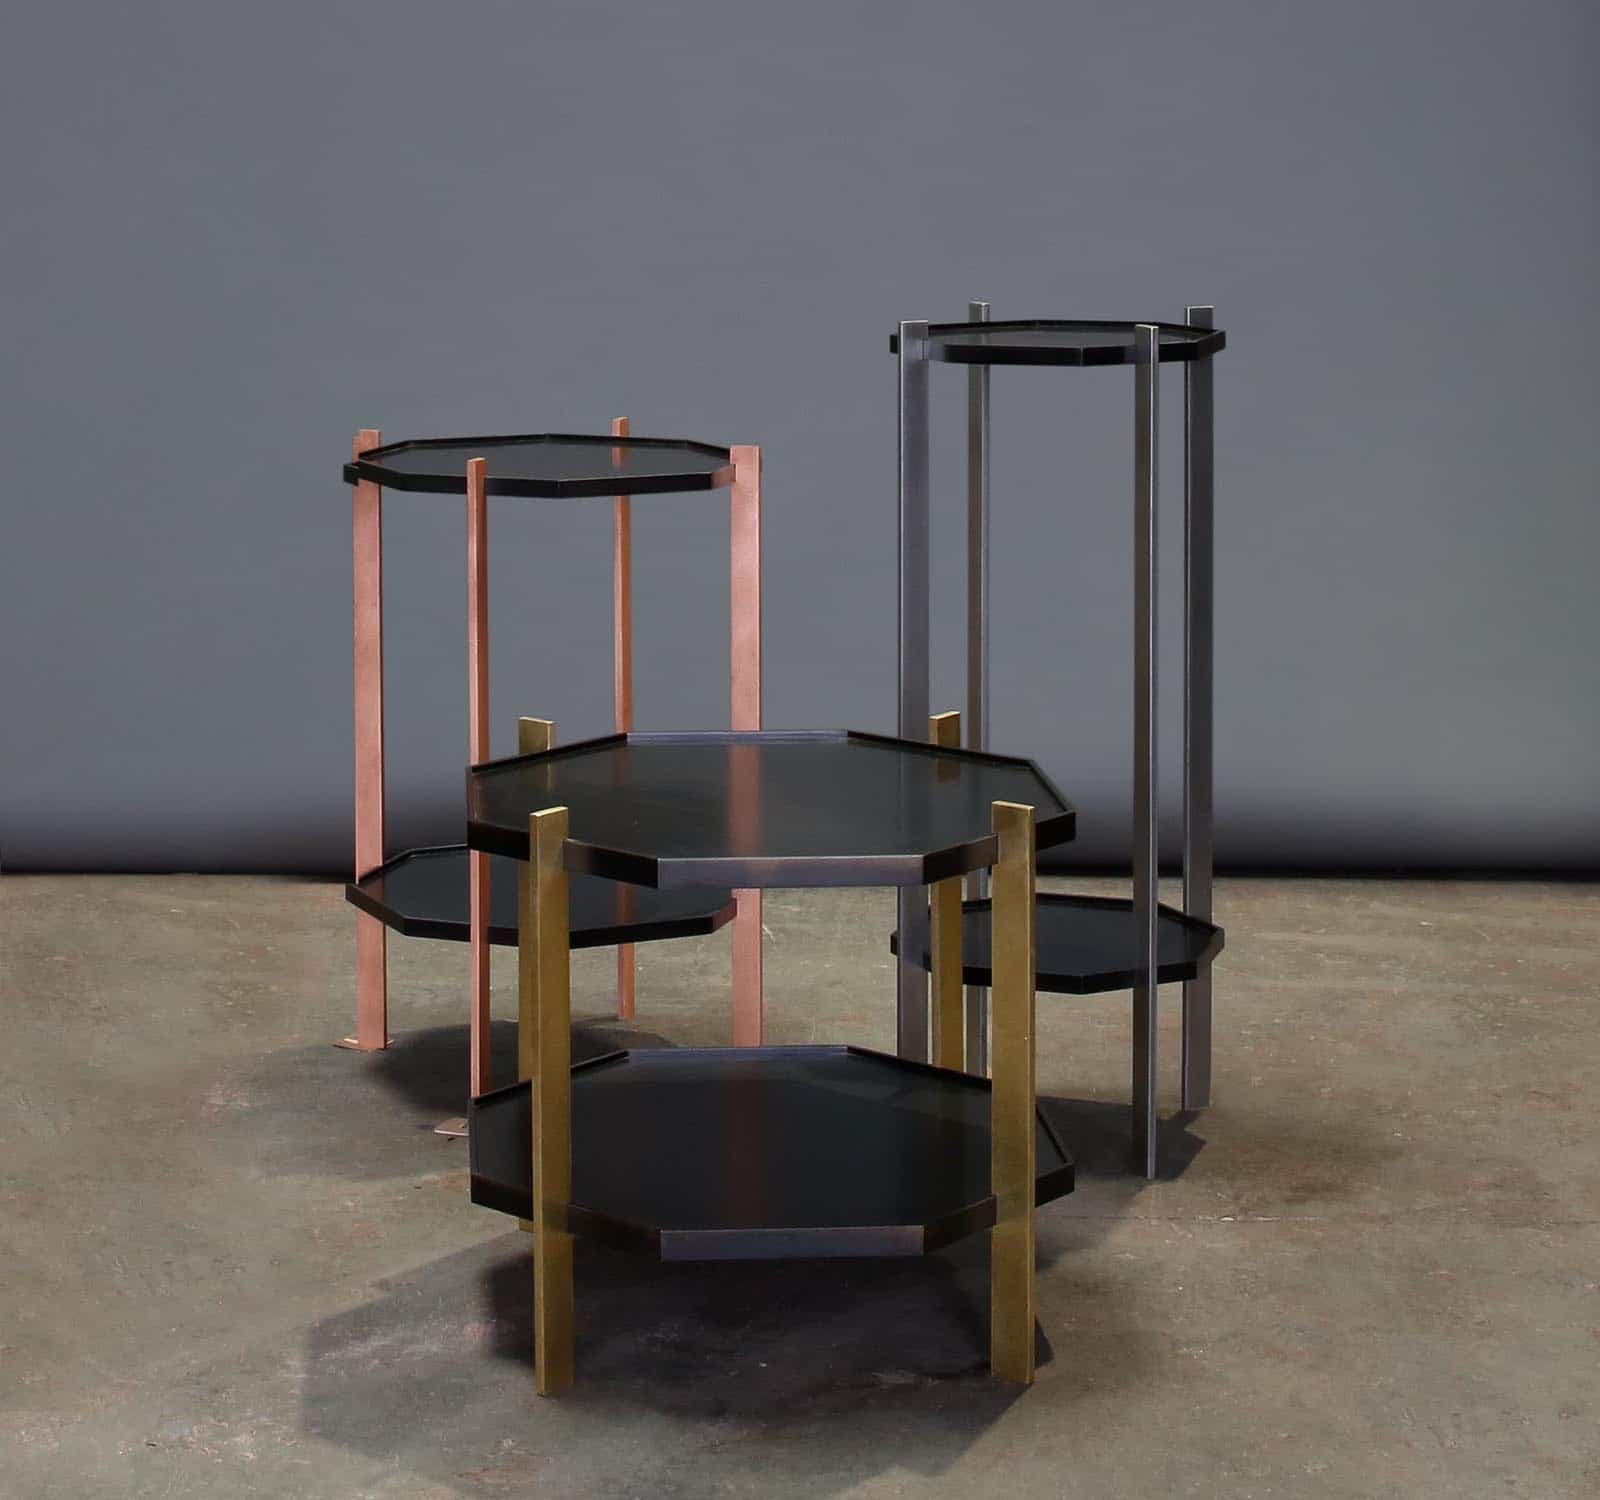 Three octagon shaped end tables with various metallic legs in copper, steel, and gold metallic finish.